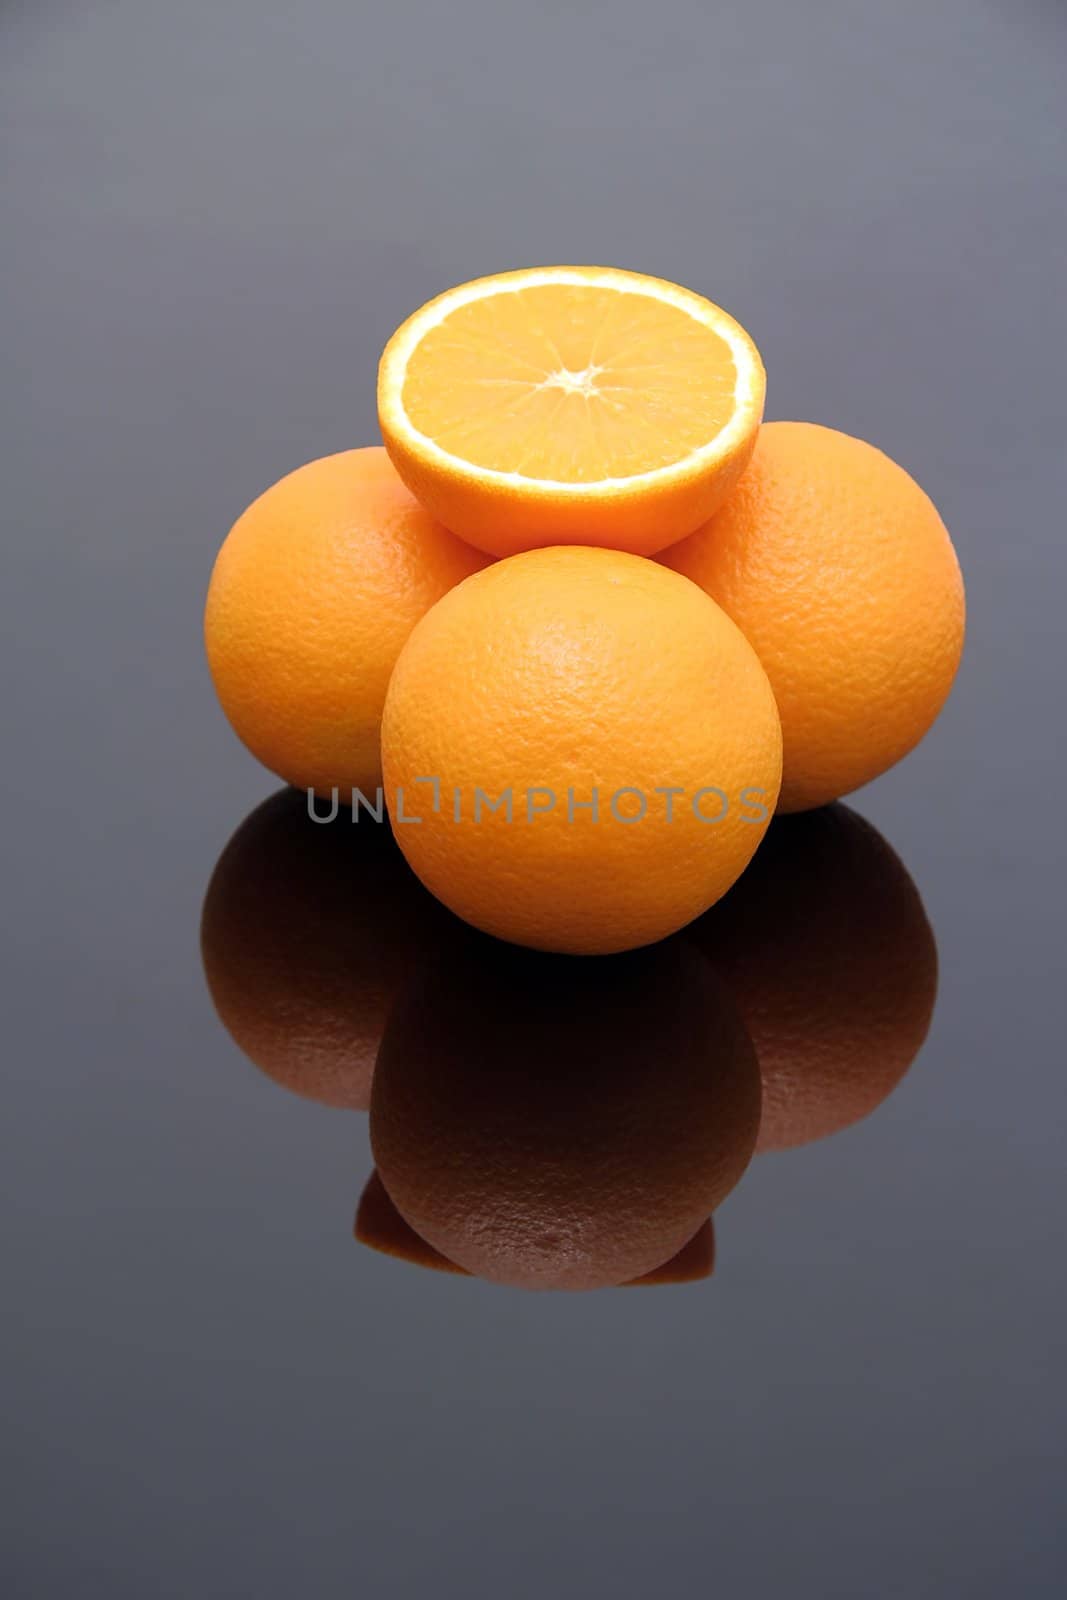 fresh oranges on reflective background, one is cut in half